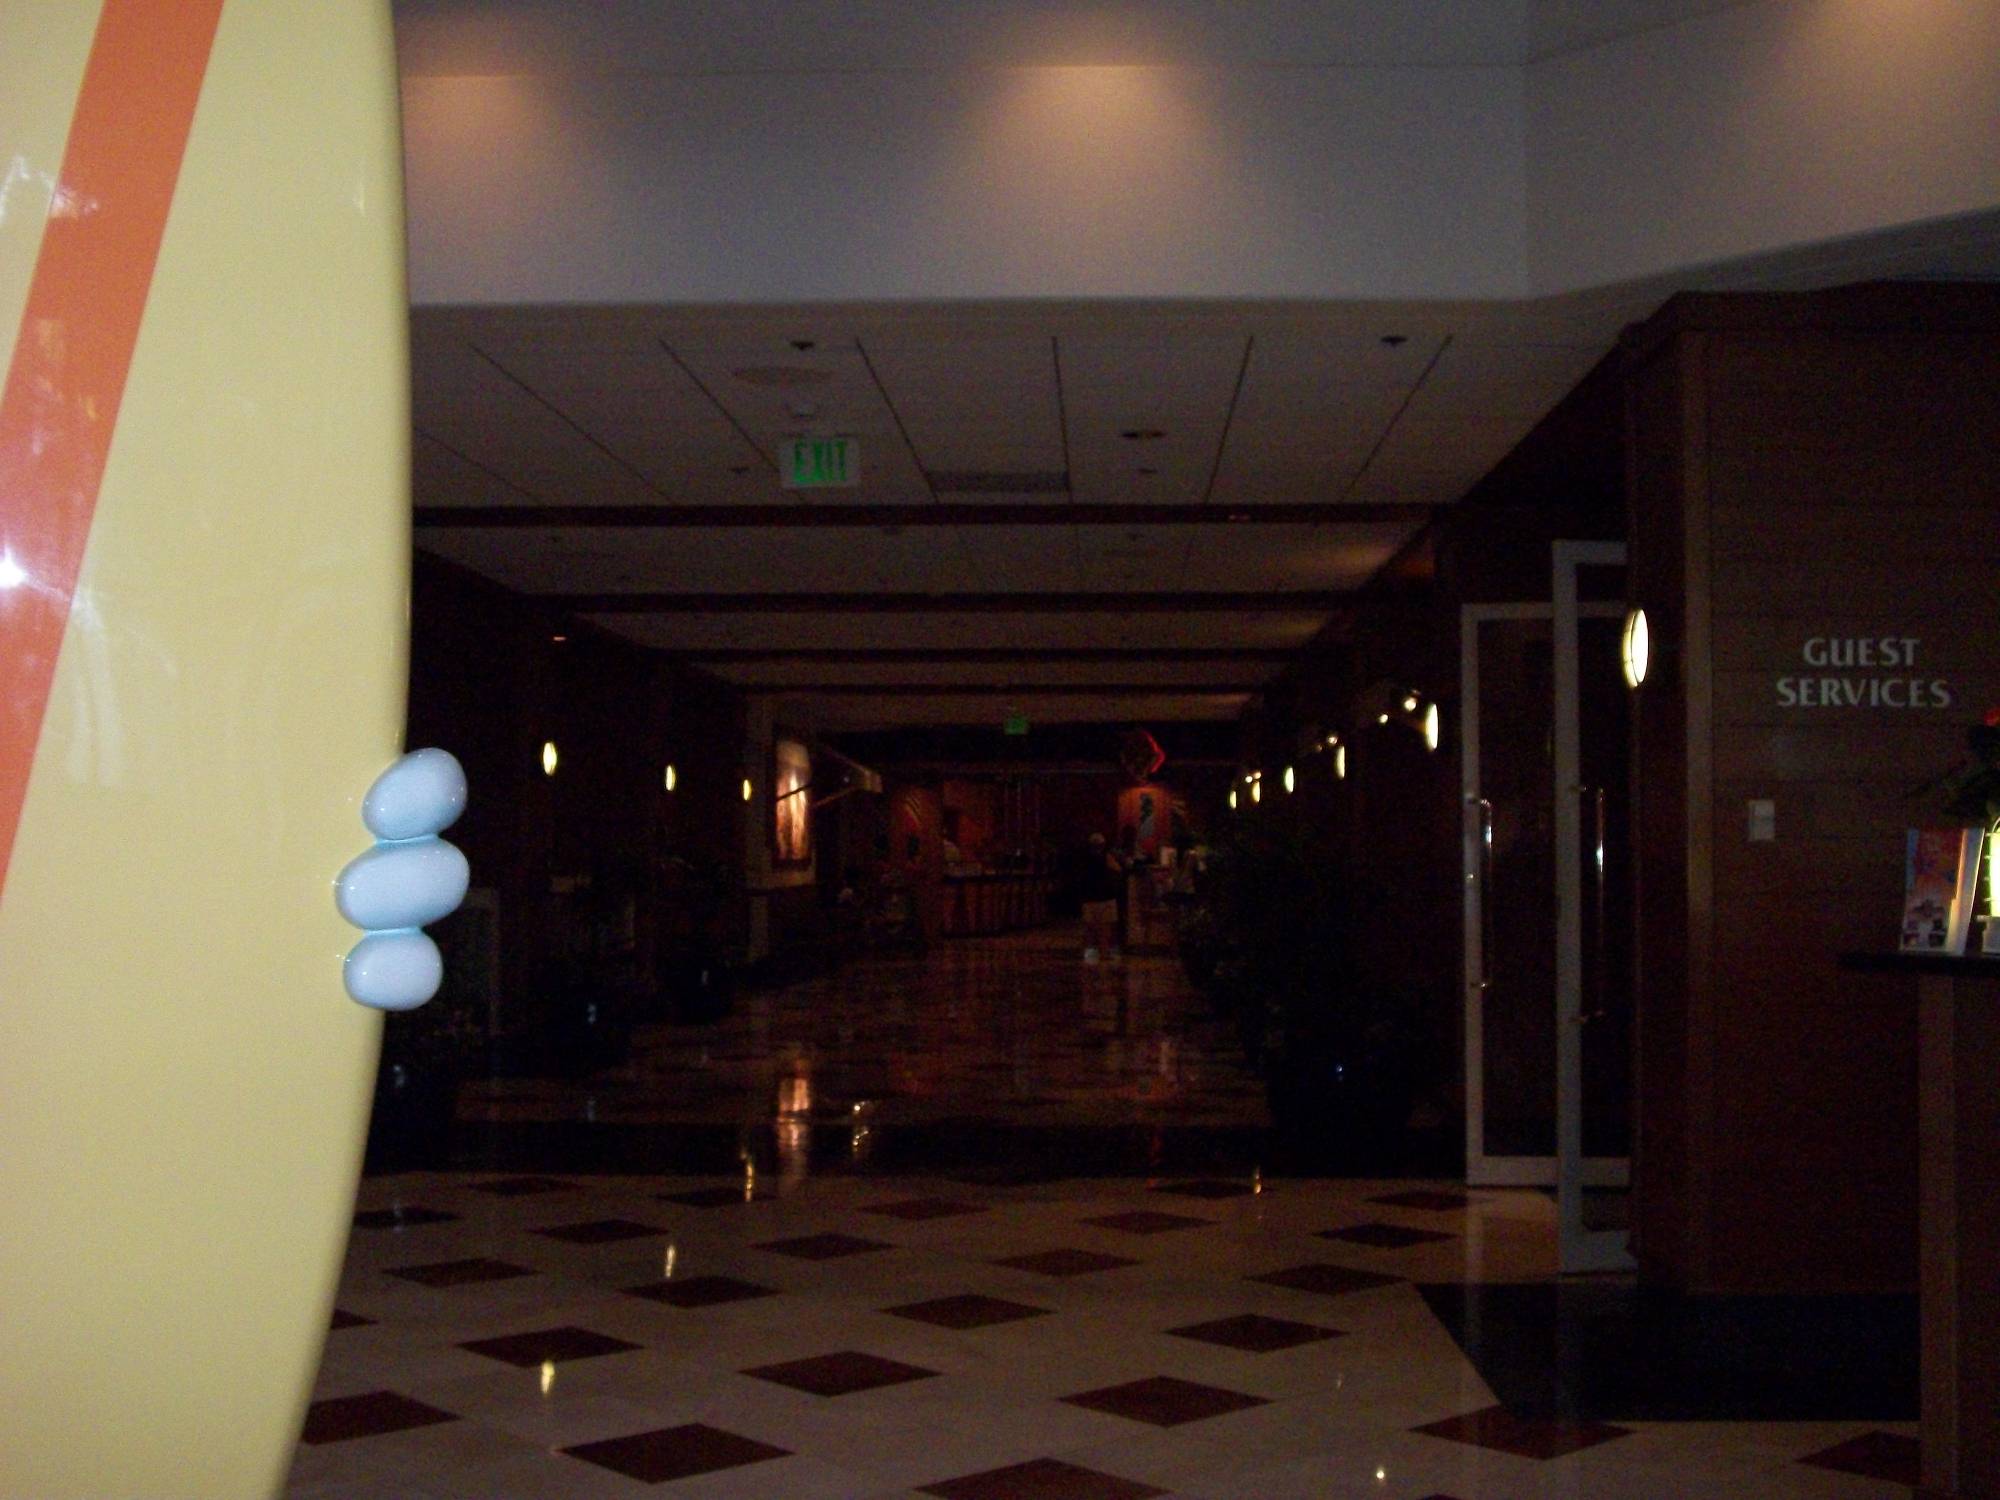 Lobby area looking towards gift shop &amp; PCH Grill Restaurant